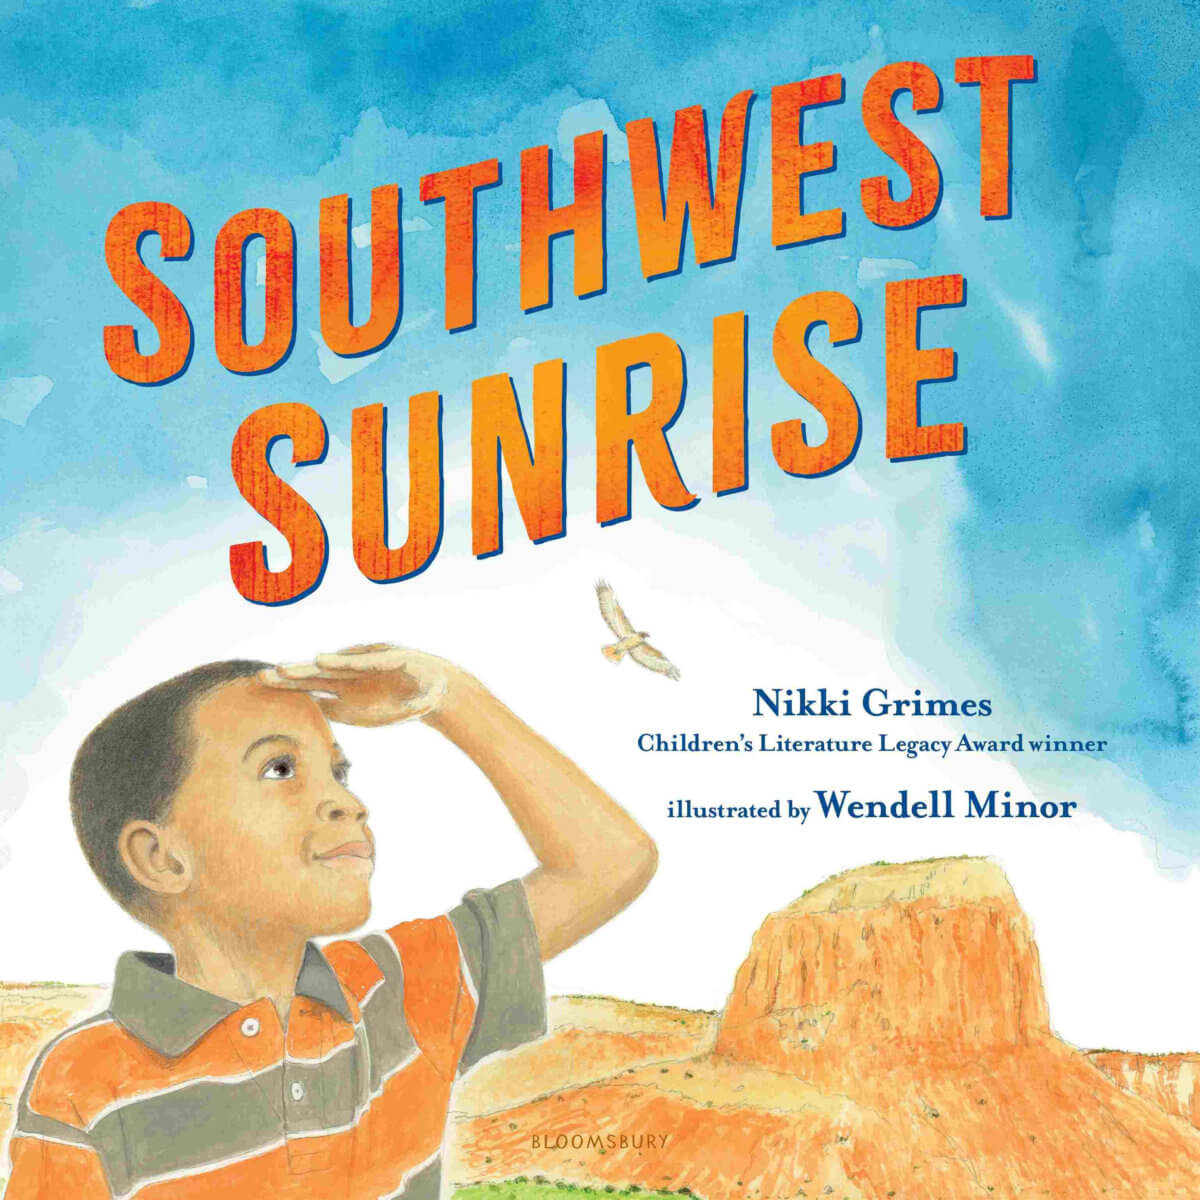 Book cover of “Southwest Sunrise” by Nikki Grimes.